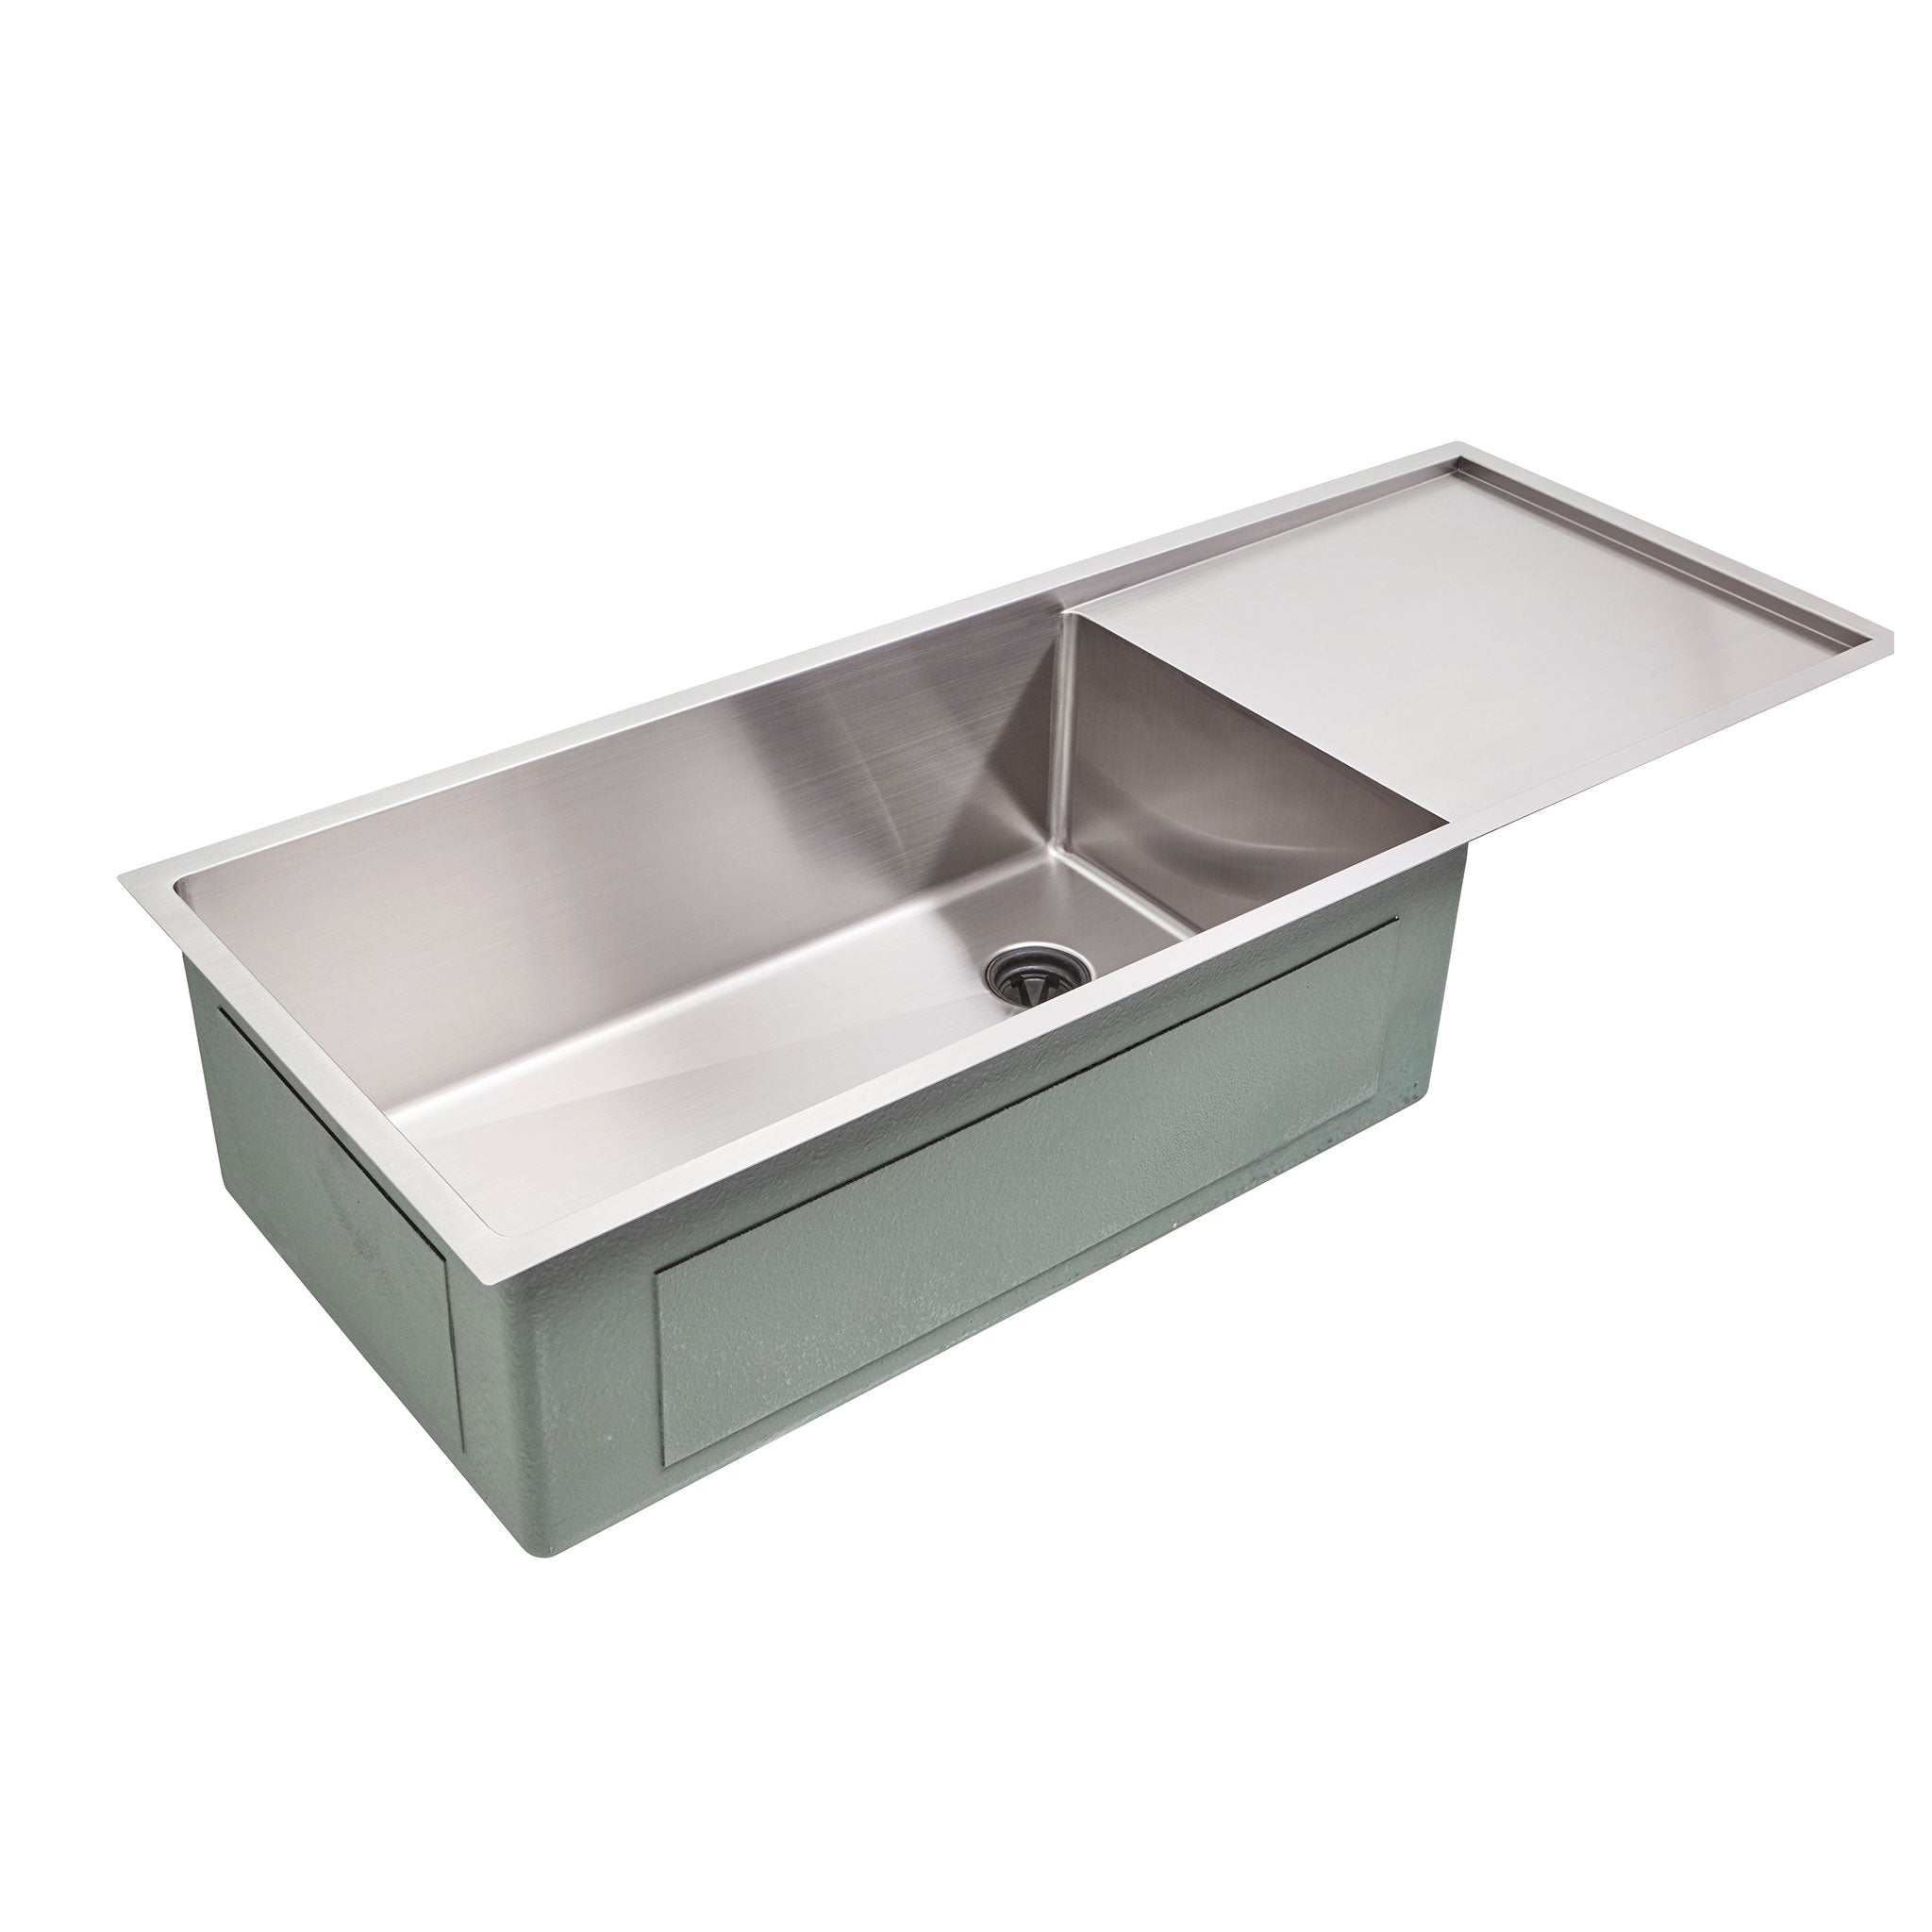 50 inch single bowl classic style stainless steel undermount drainboard kitchen sink with offset drain and reversible design